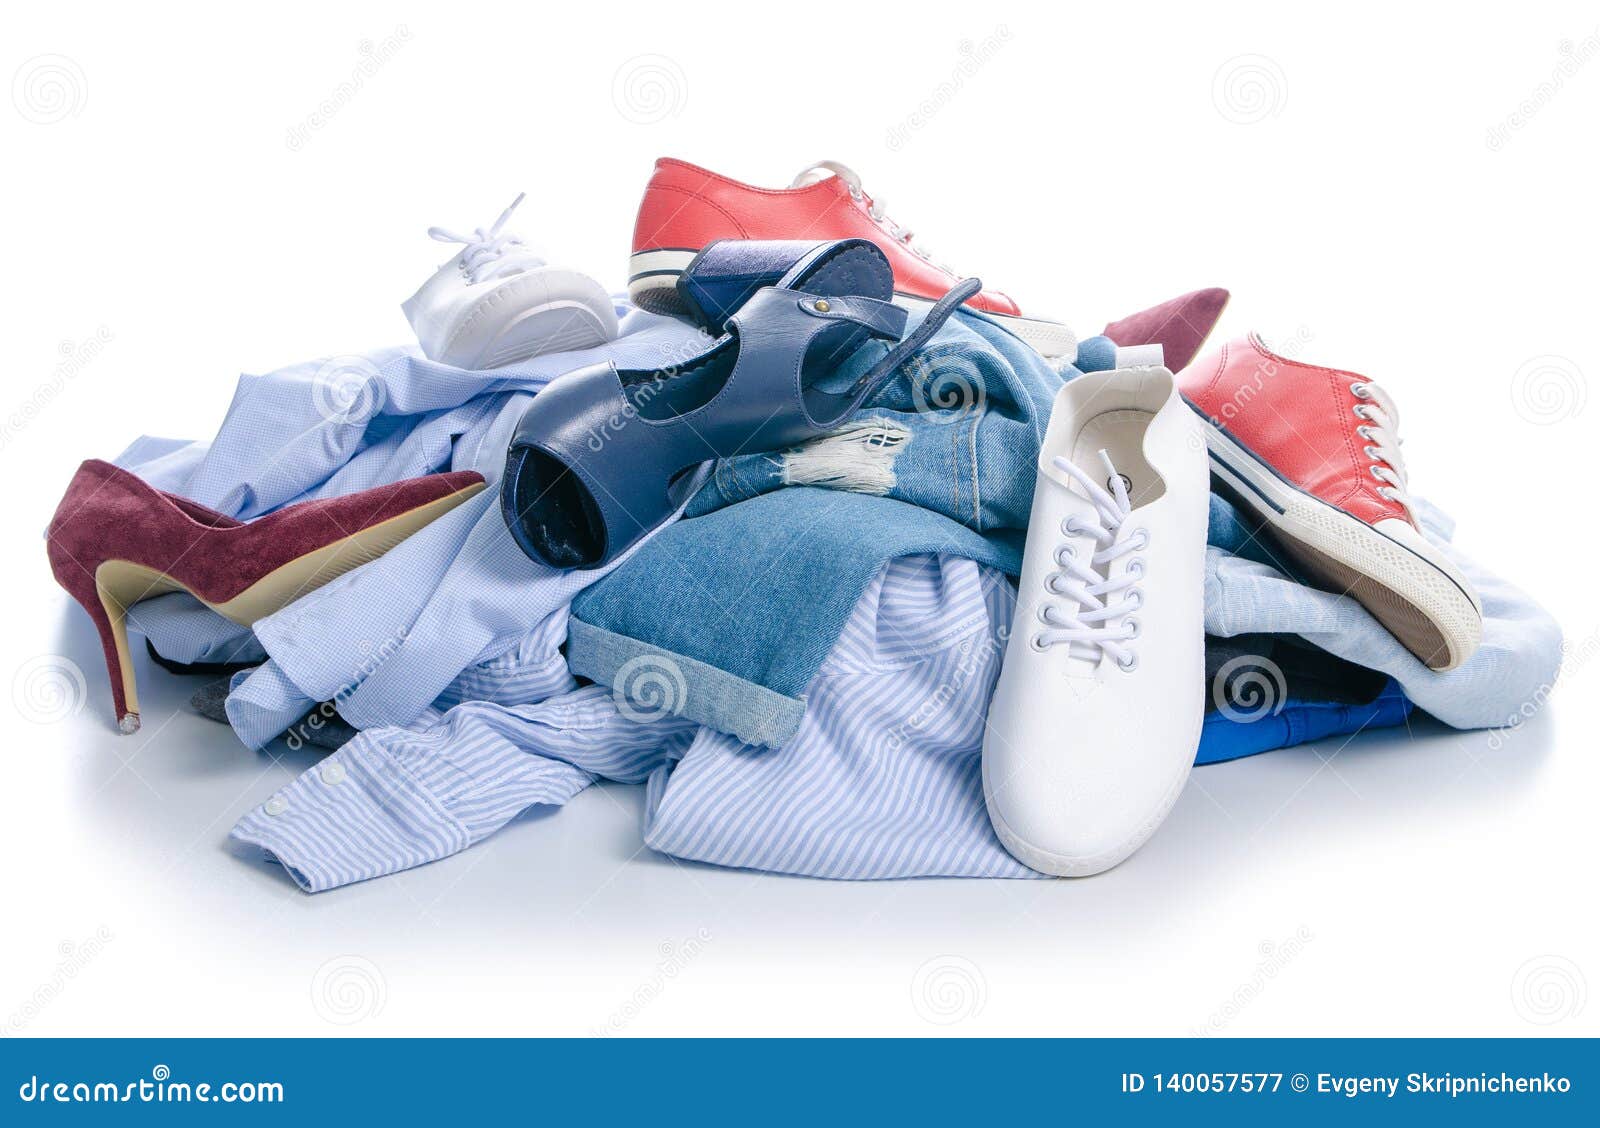 A Pile of Clothes and Shoes Stock Image - Image of casual, accessories ...